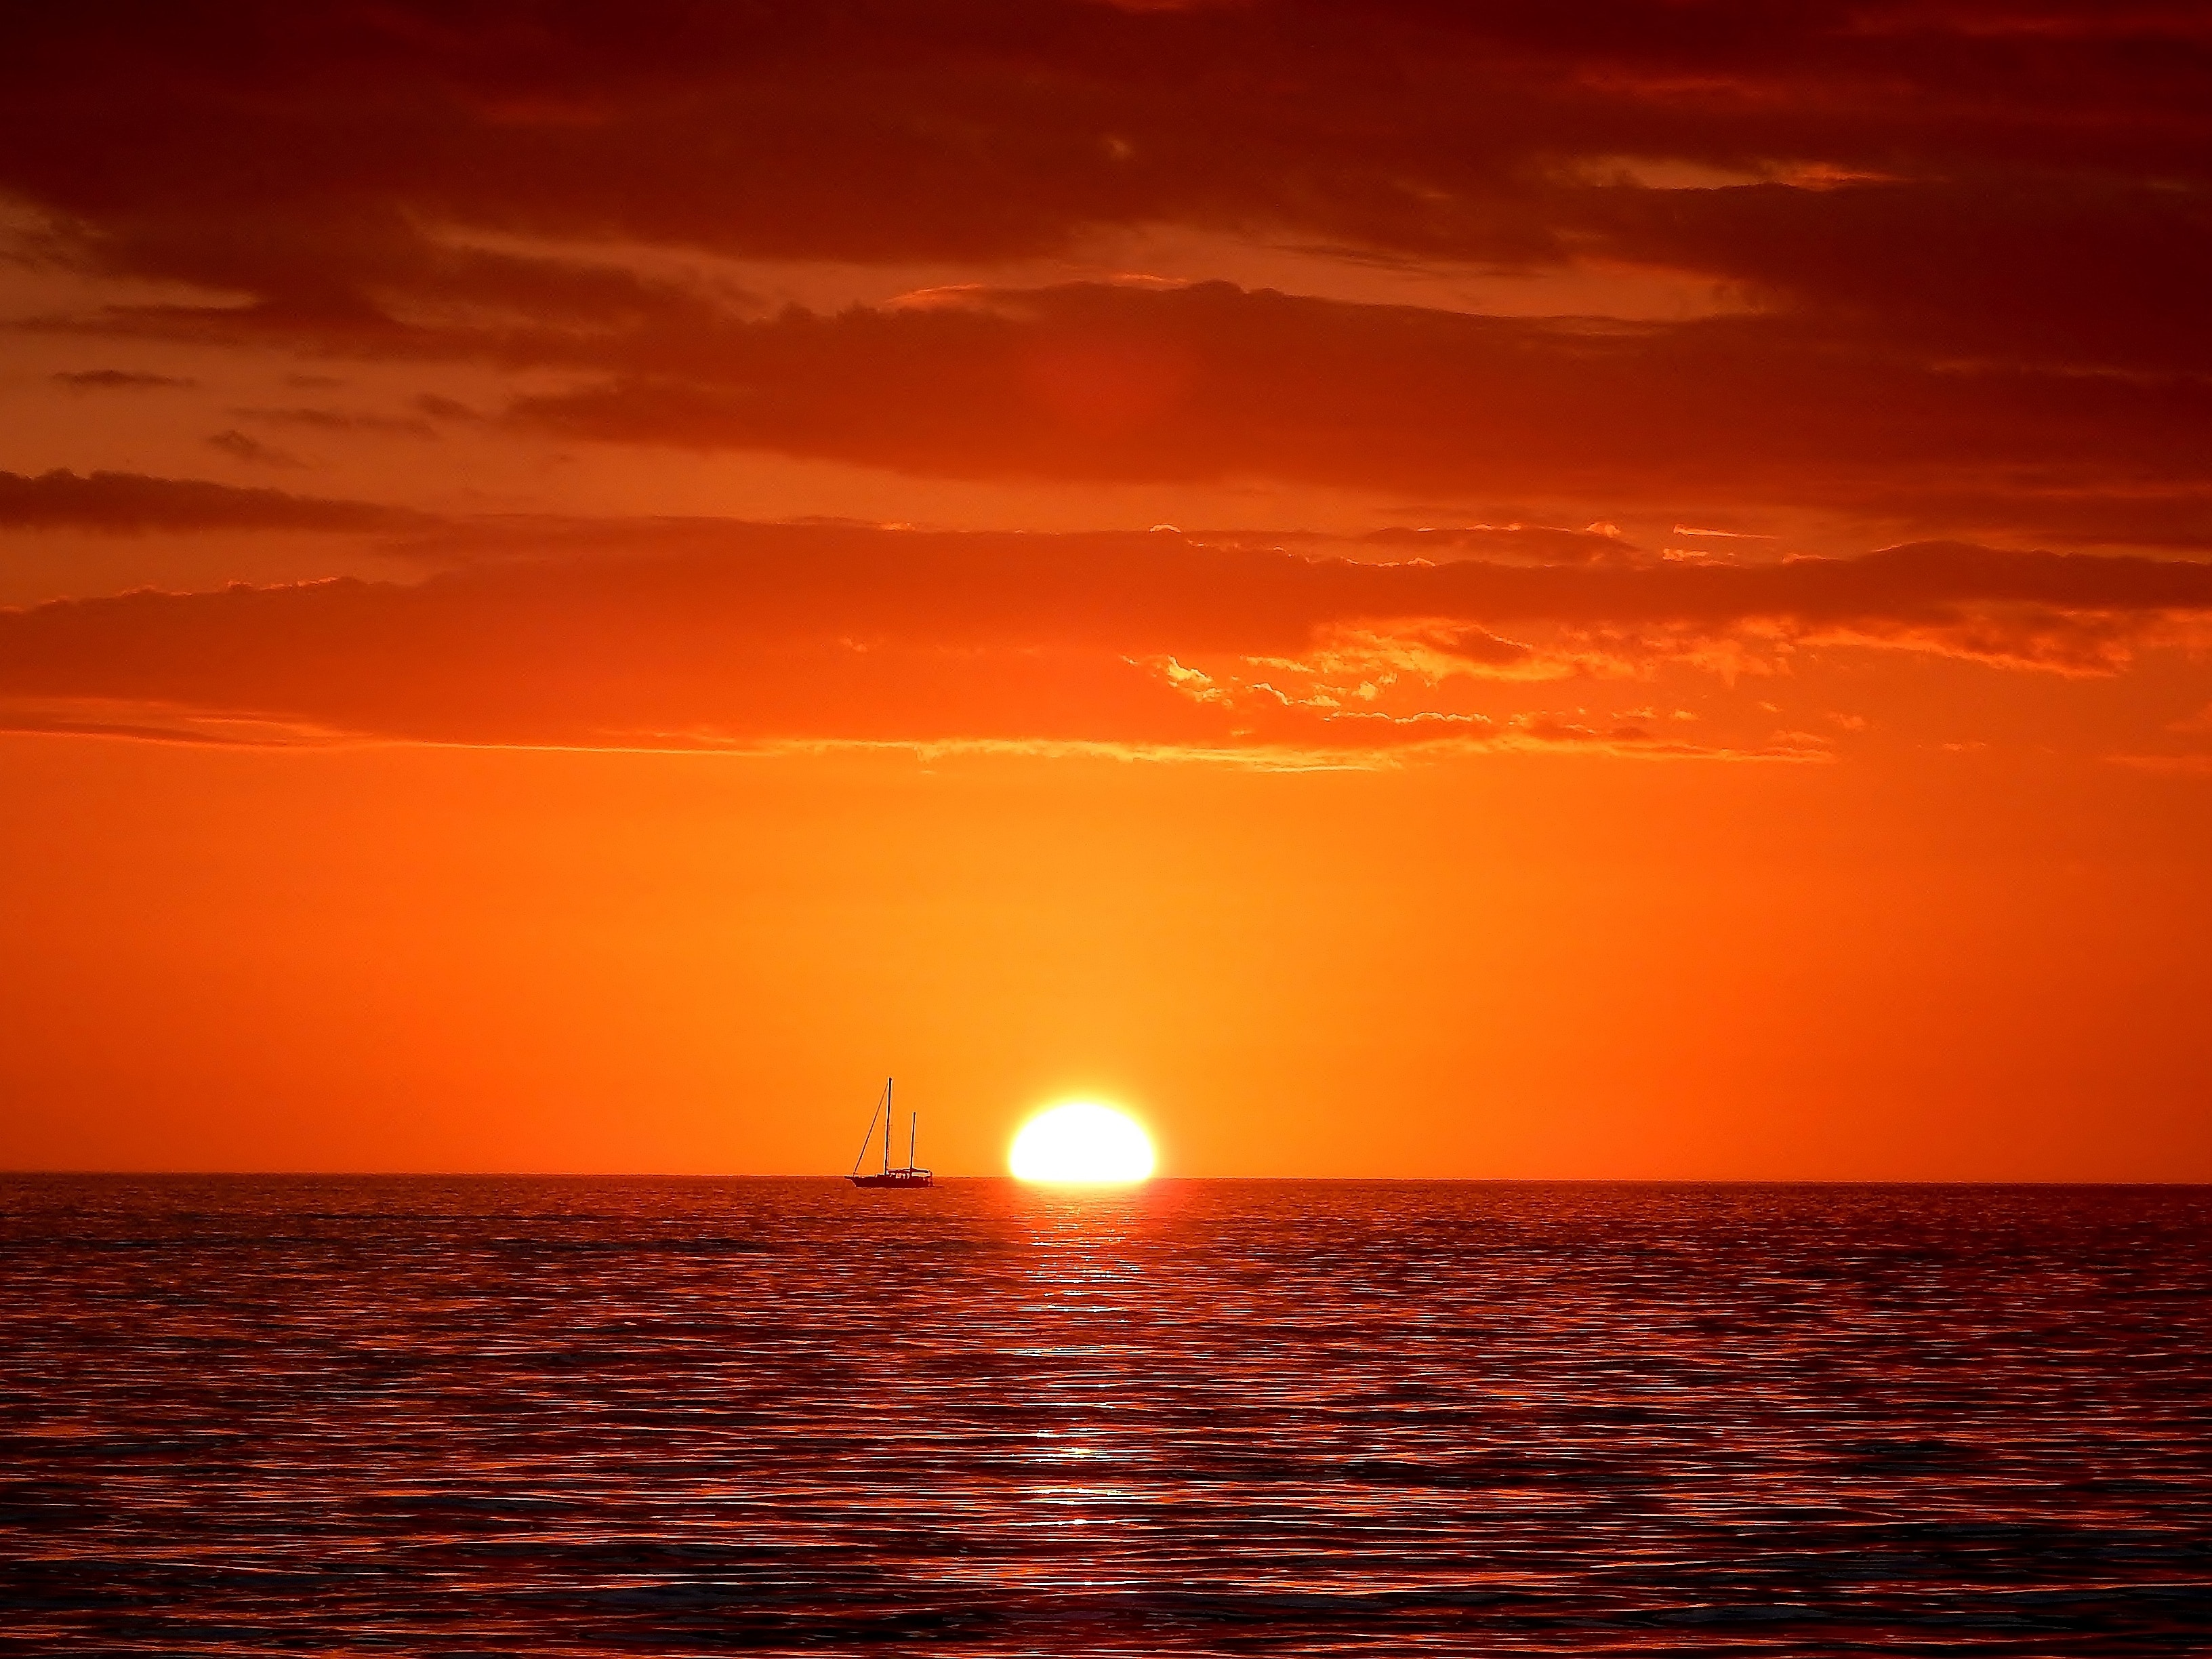 Sunrise with boat on the horizon on the ocean